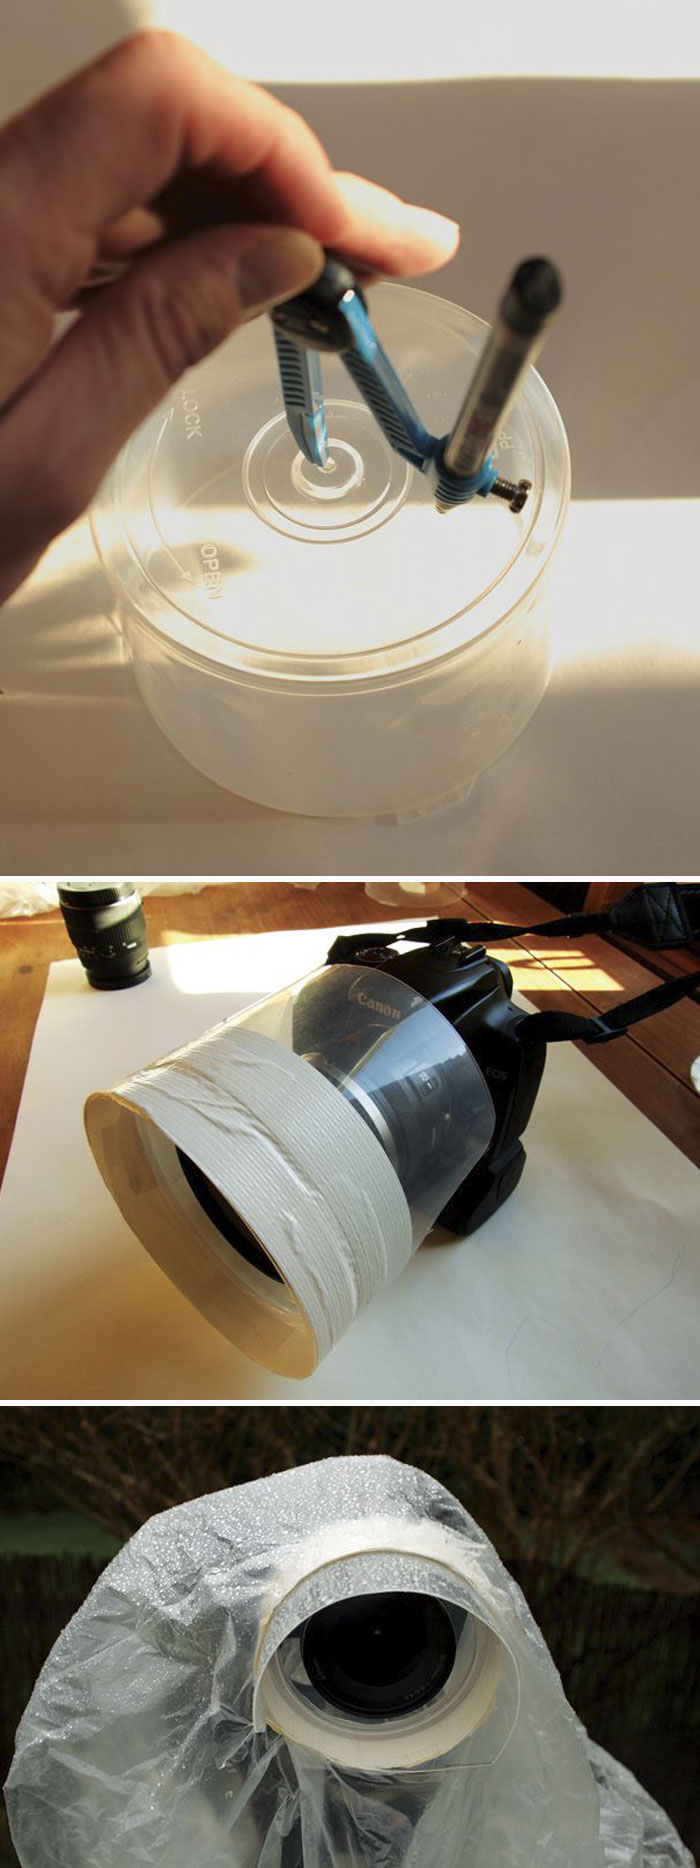 Blank CD Case Is The Perfect Rain Guard For Your Lens